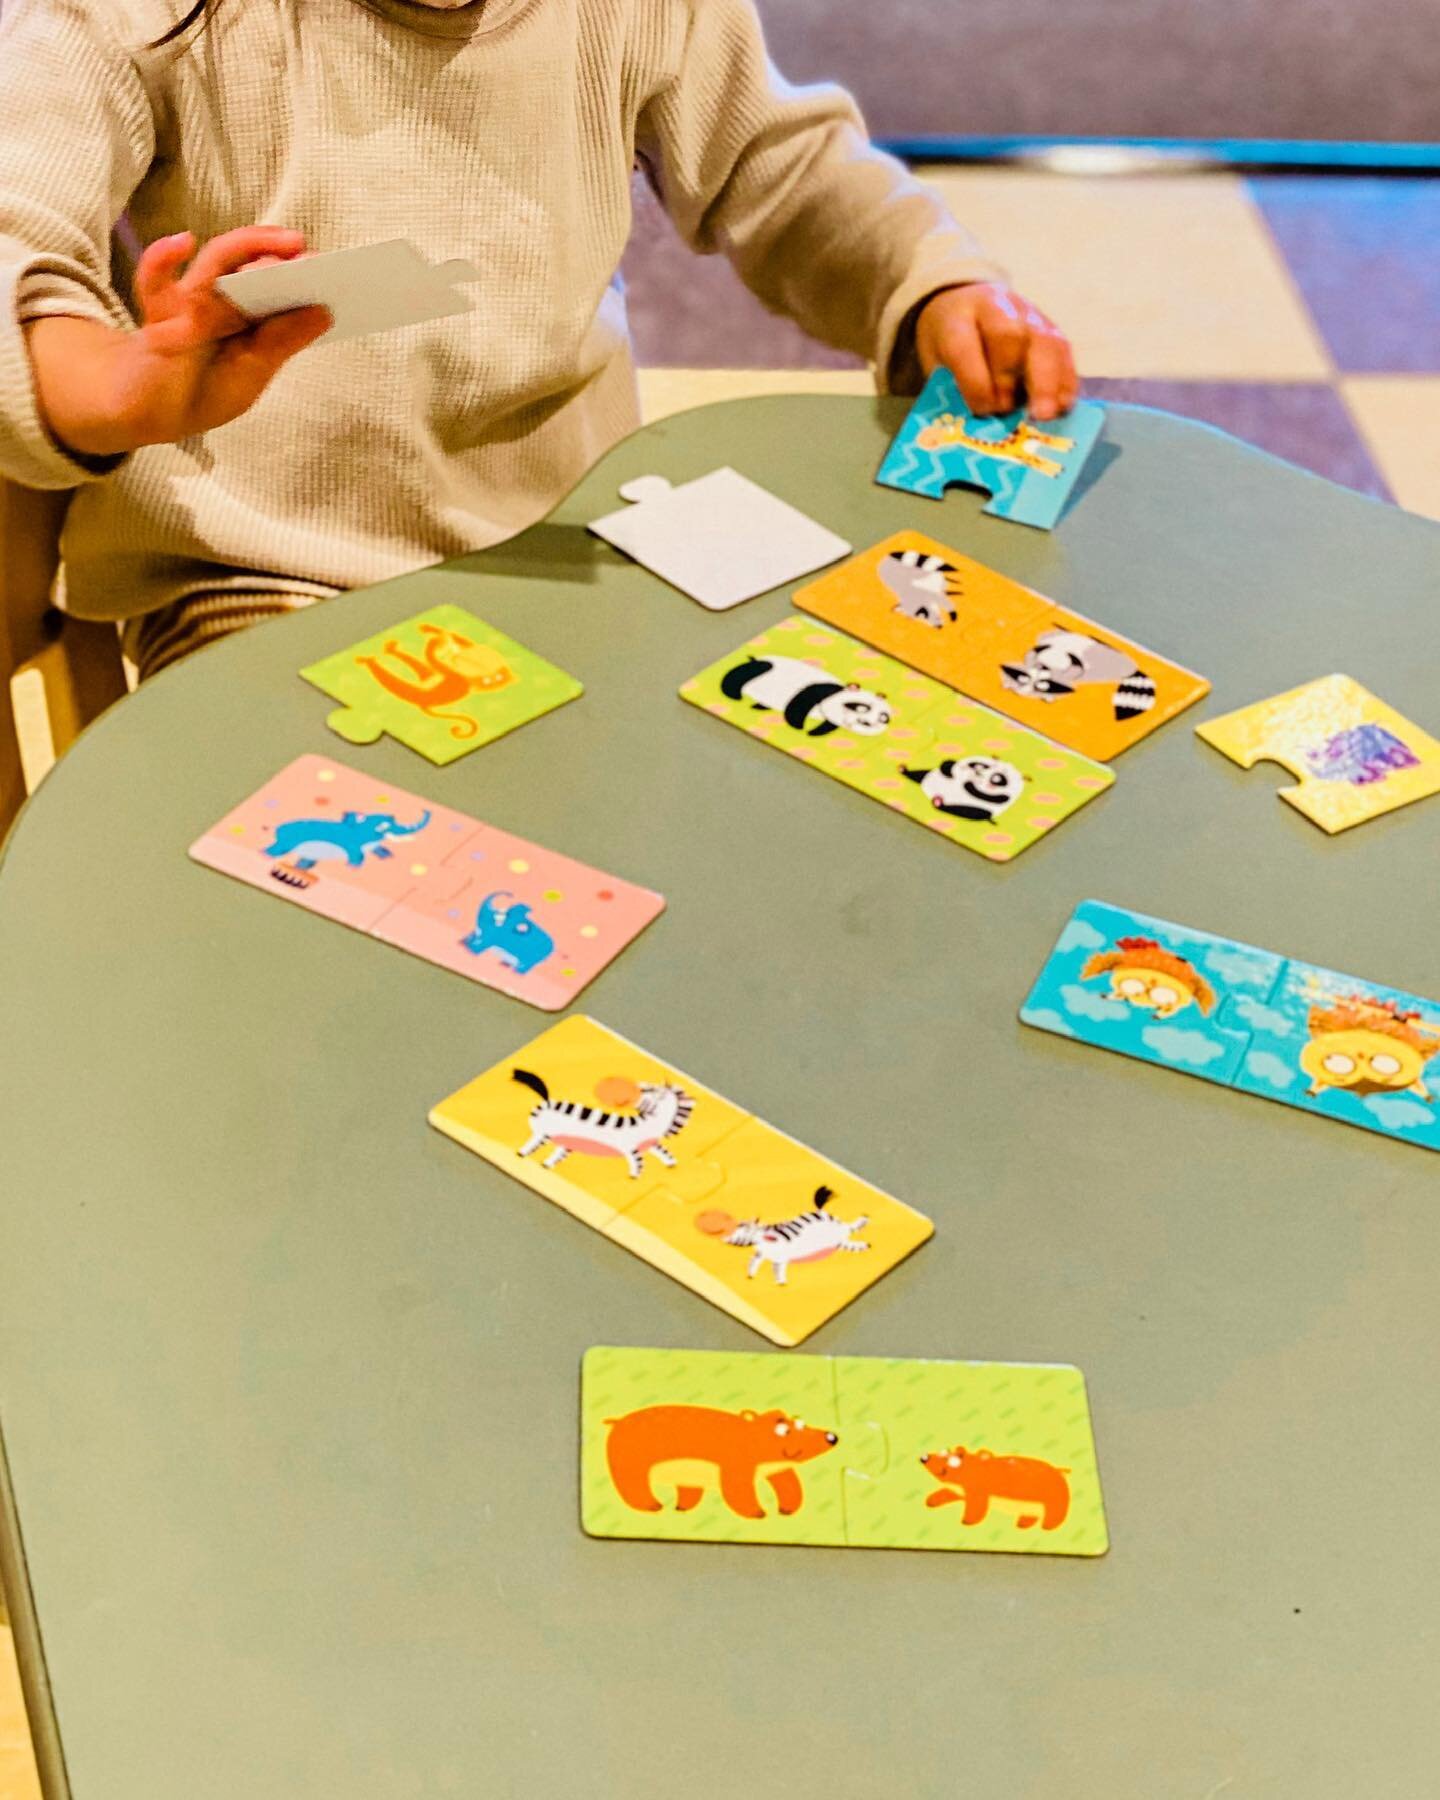 Putting together all the pieces to these puzzling pairs is promoting educational play.

Image Description: A student sits at a green table putting together a puzzle. Some pieces have an adult animal and others have a baby animal to be matched.

#pres